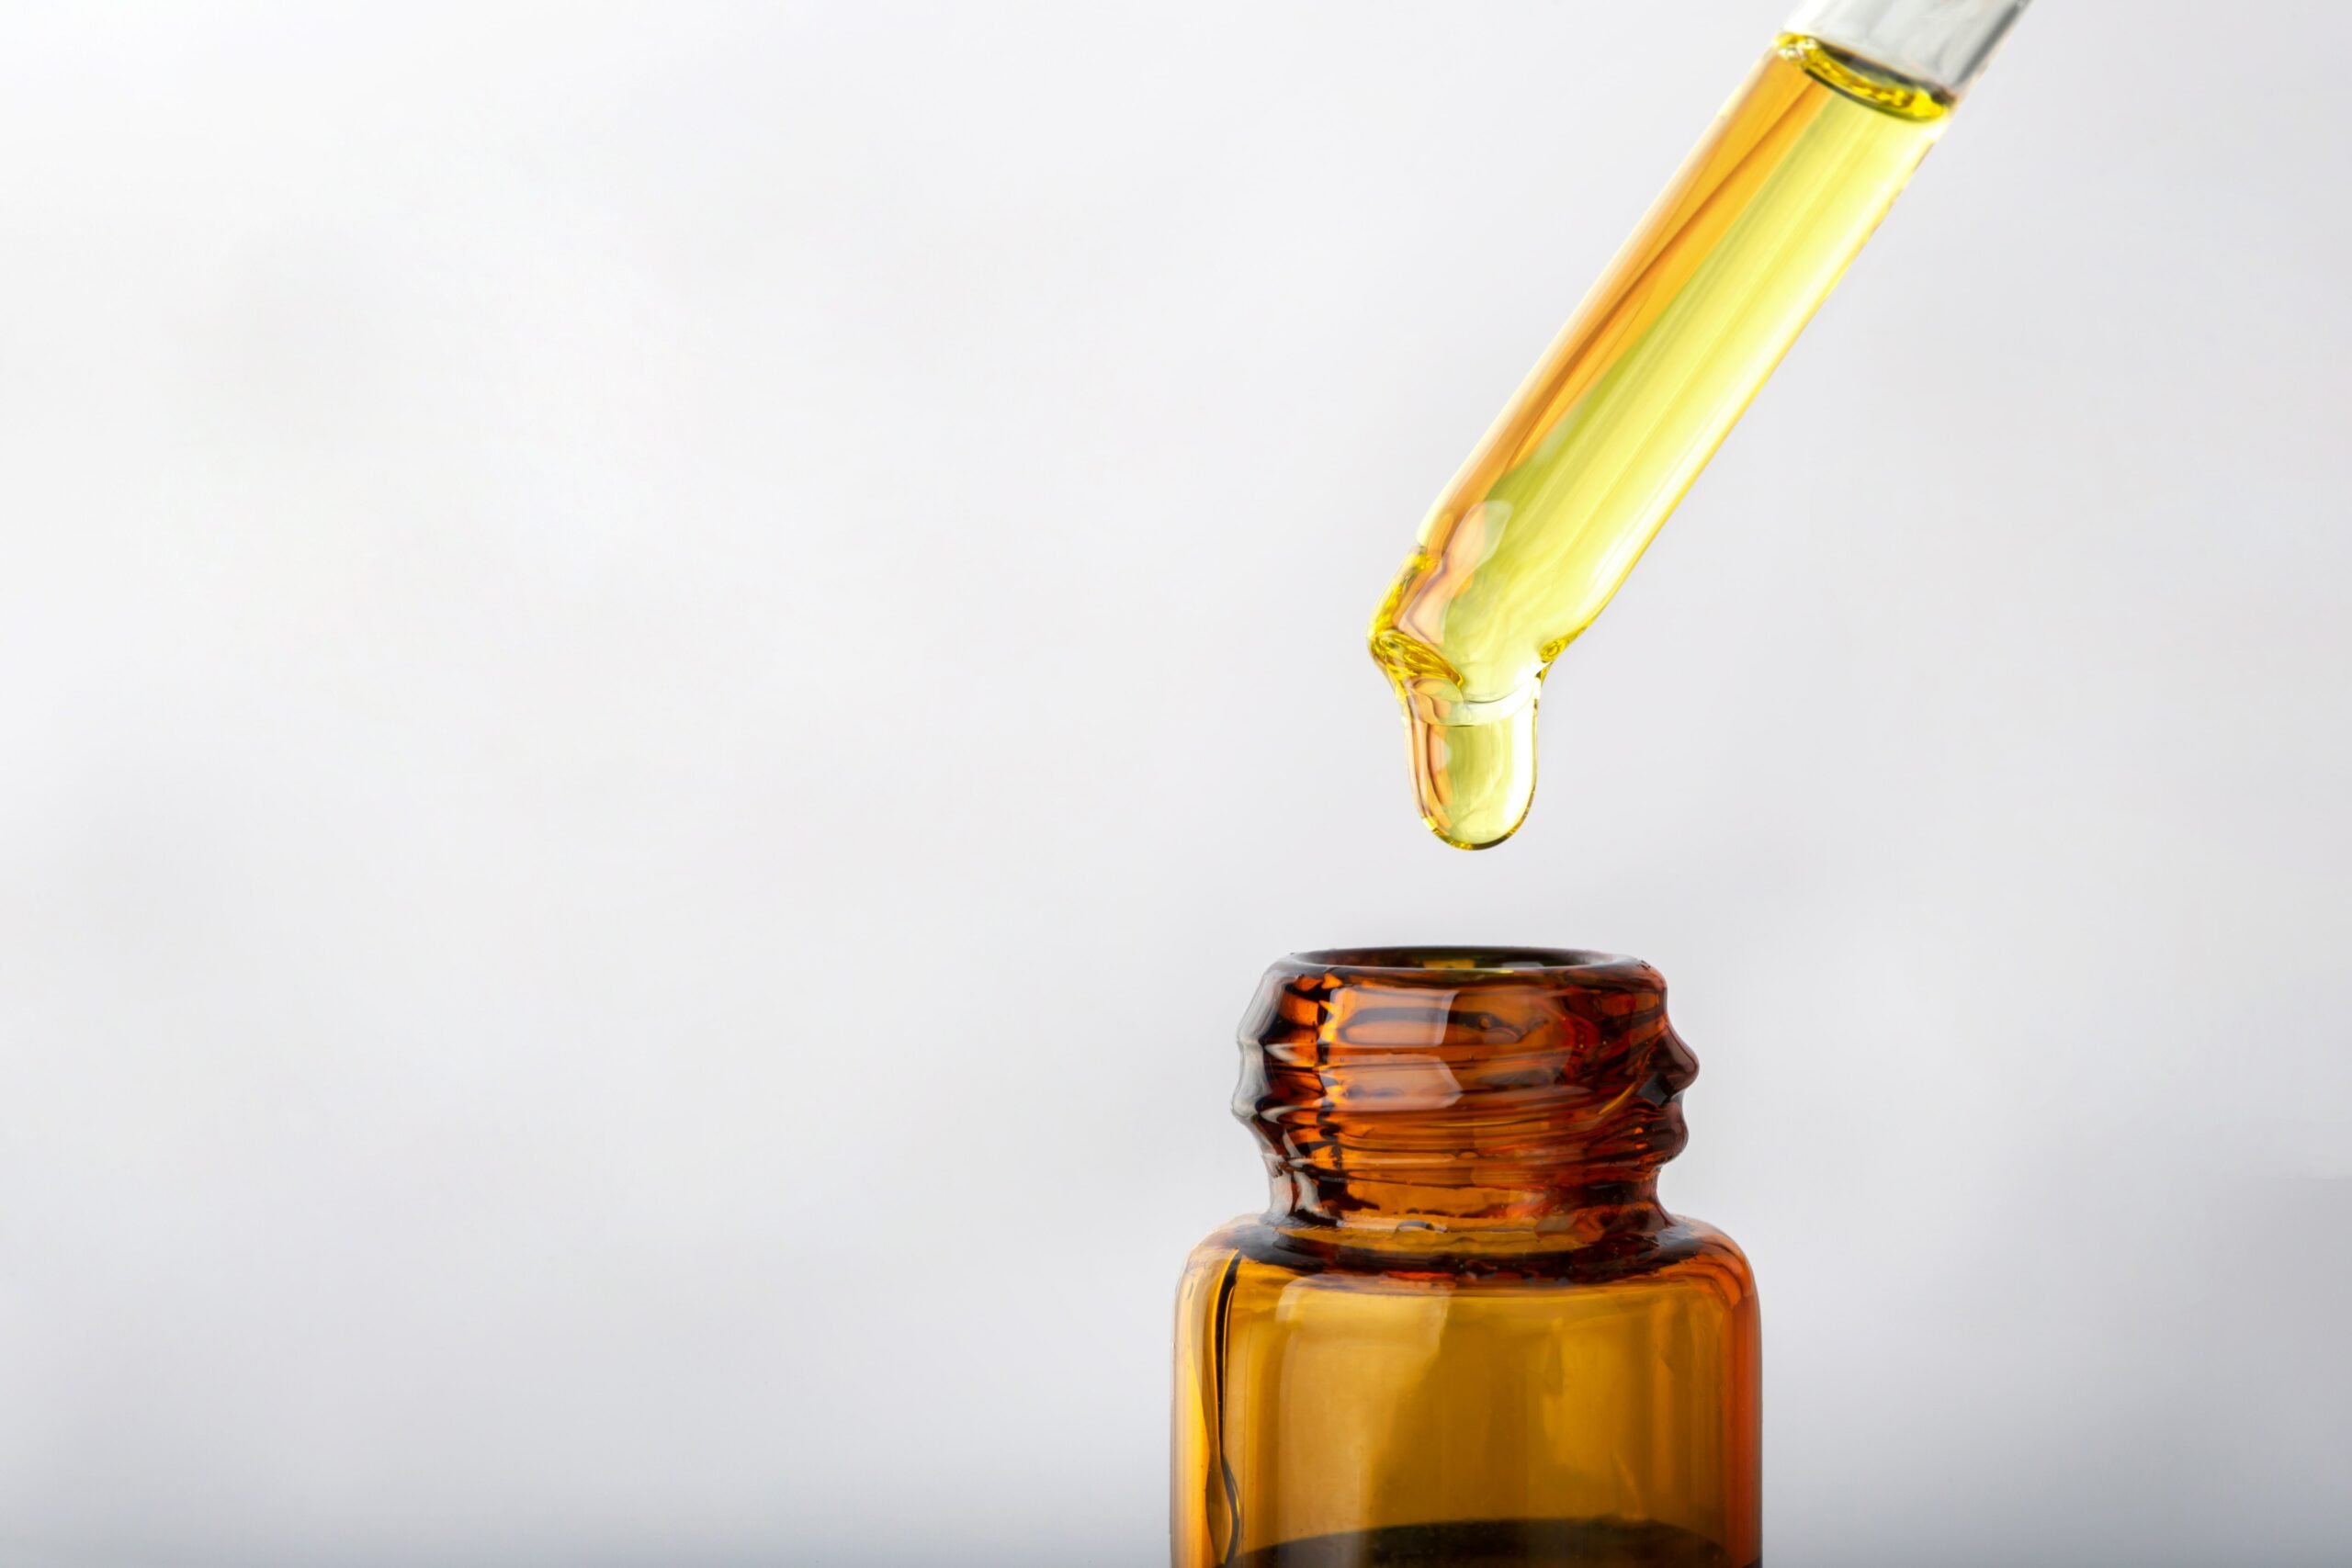 How to Take CBD Oil: Dose, Types, and More